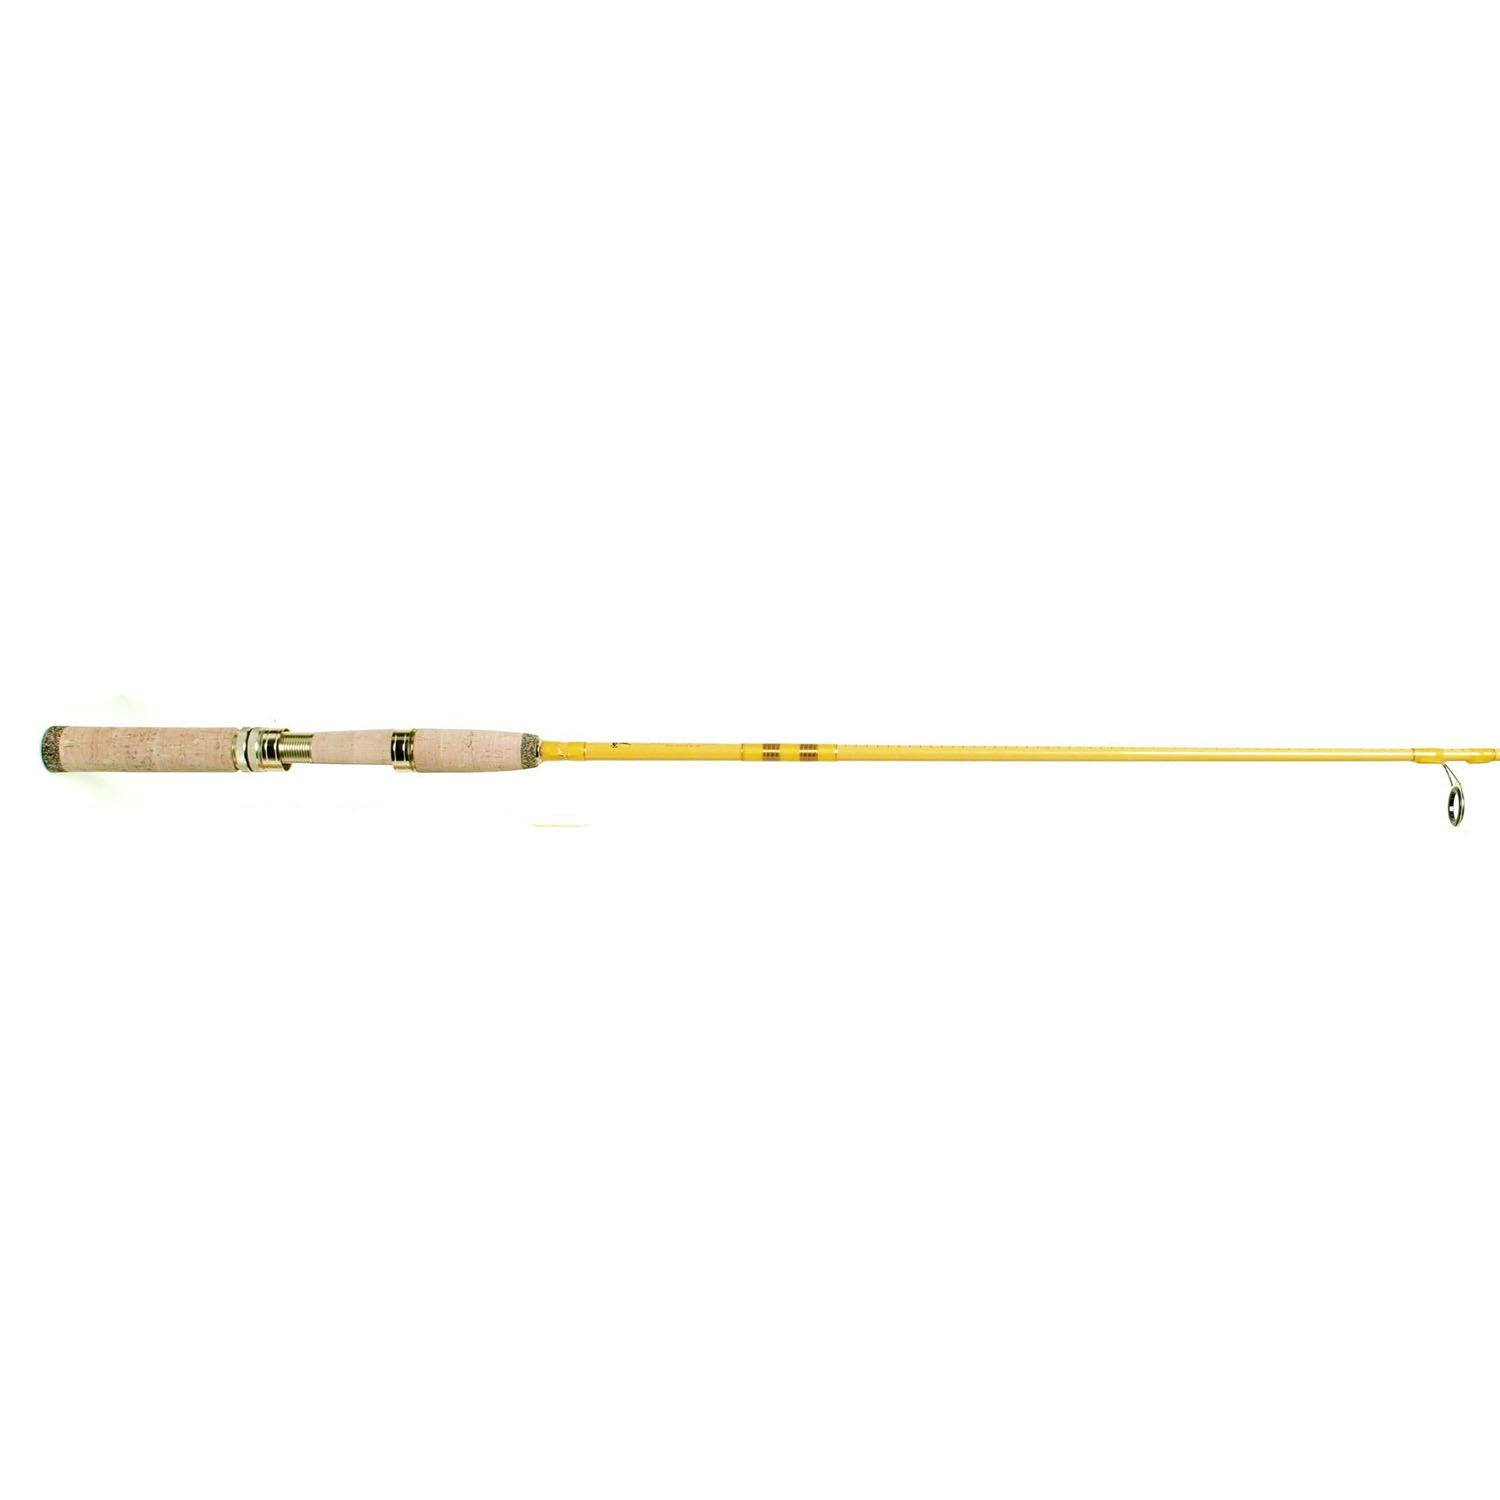 Eagle Claw Featherlight Fly Rod FL300-8 , $2.00 Off with Free S&H